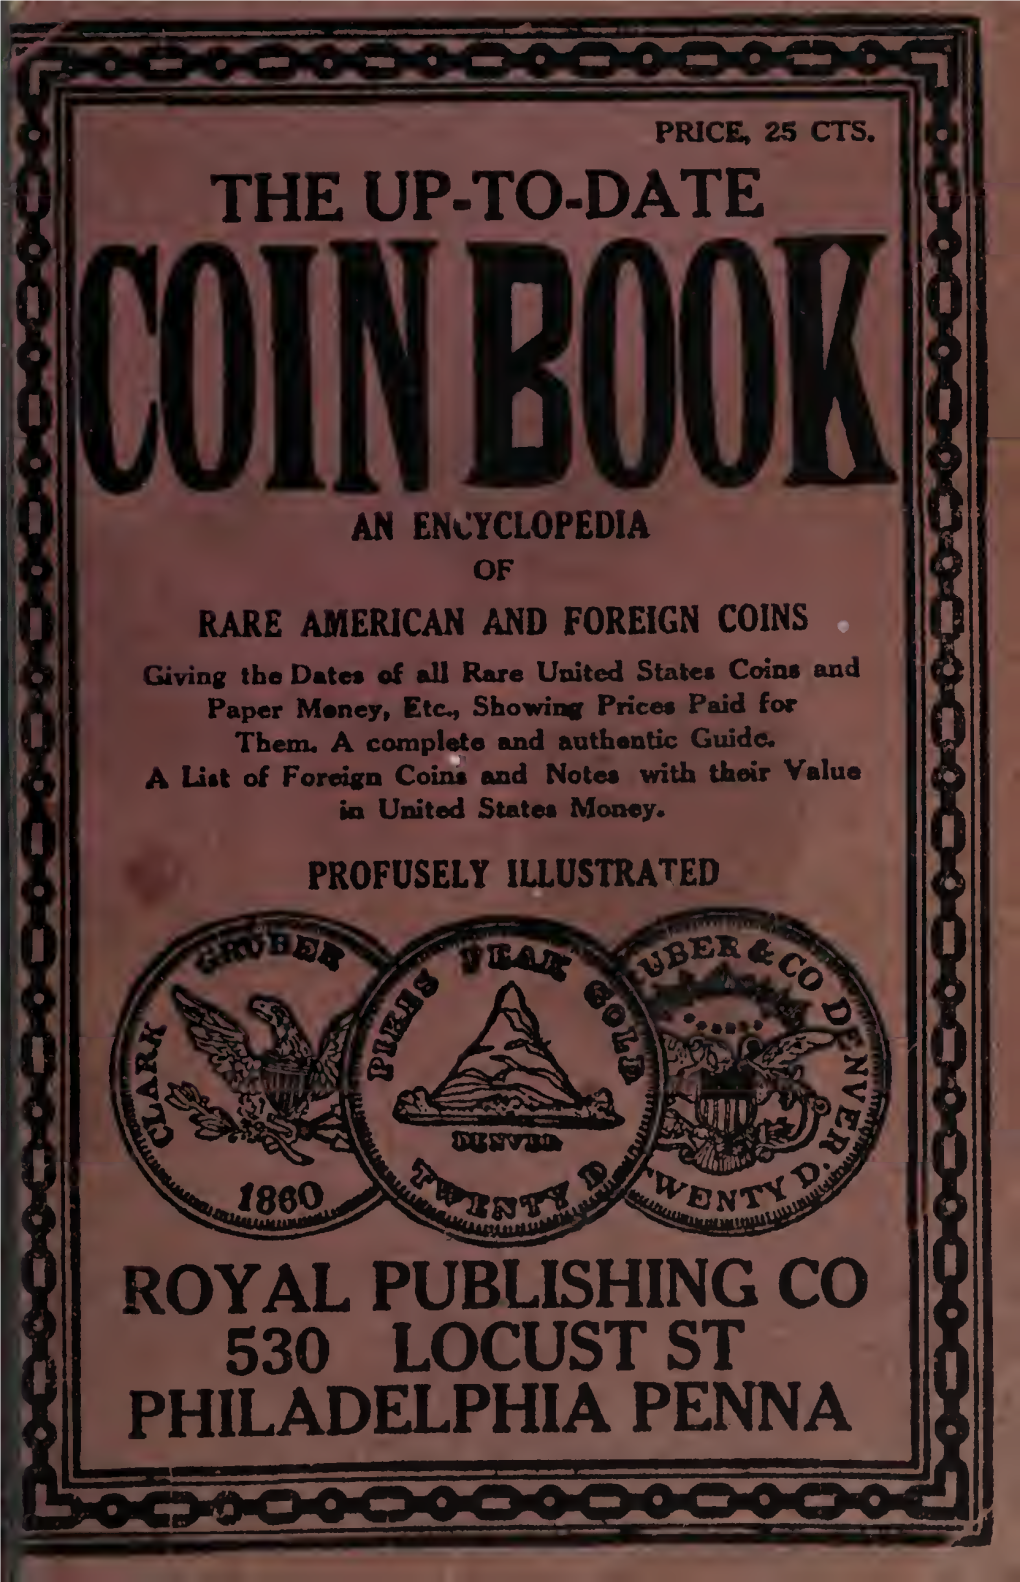 The Up-To-Date Coin Book